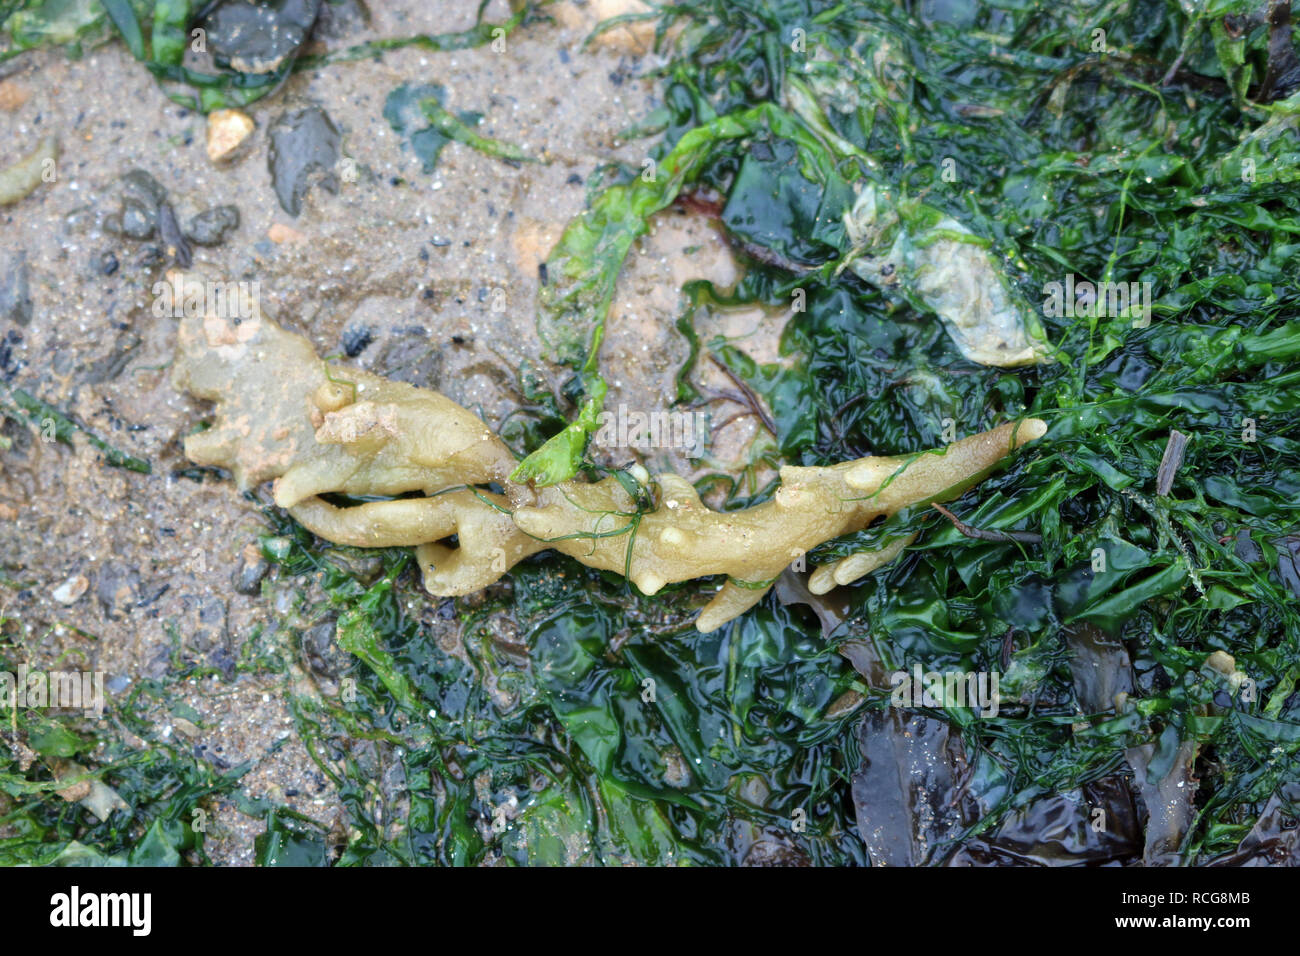 Sea chervil (Alcyonidium diaphanum), a bryozoan that causes the skin complaint Dogger Bank Itch in fisherman. Sand and seaweed as background. Stock Photo